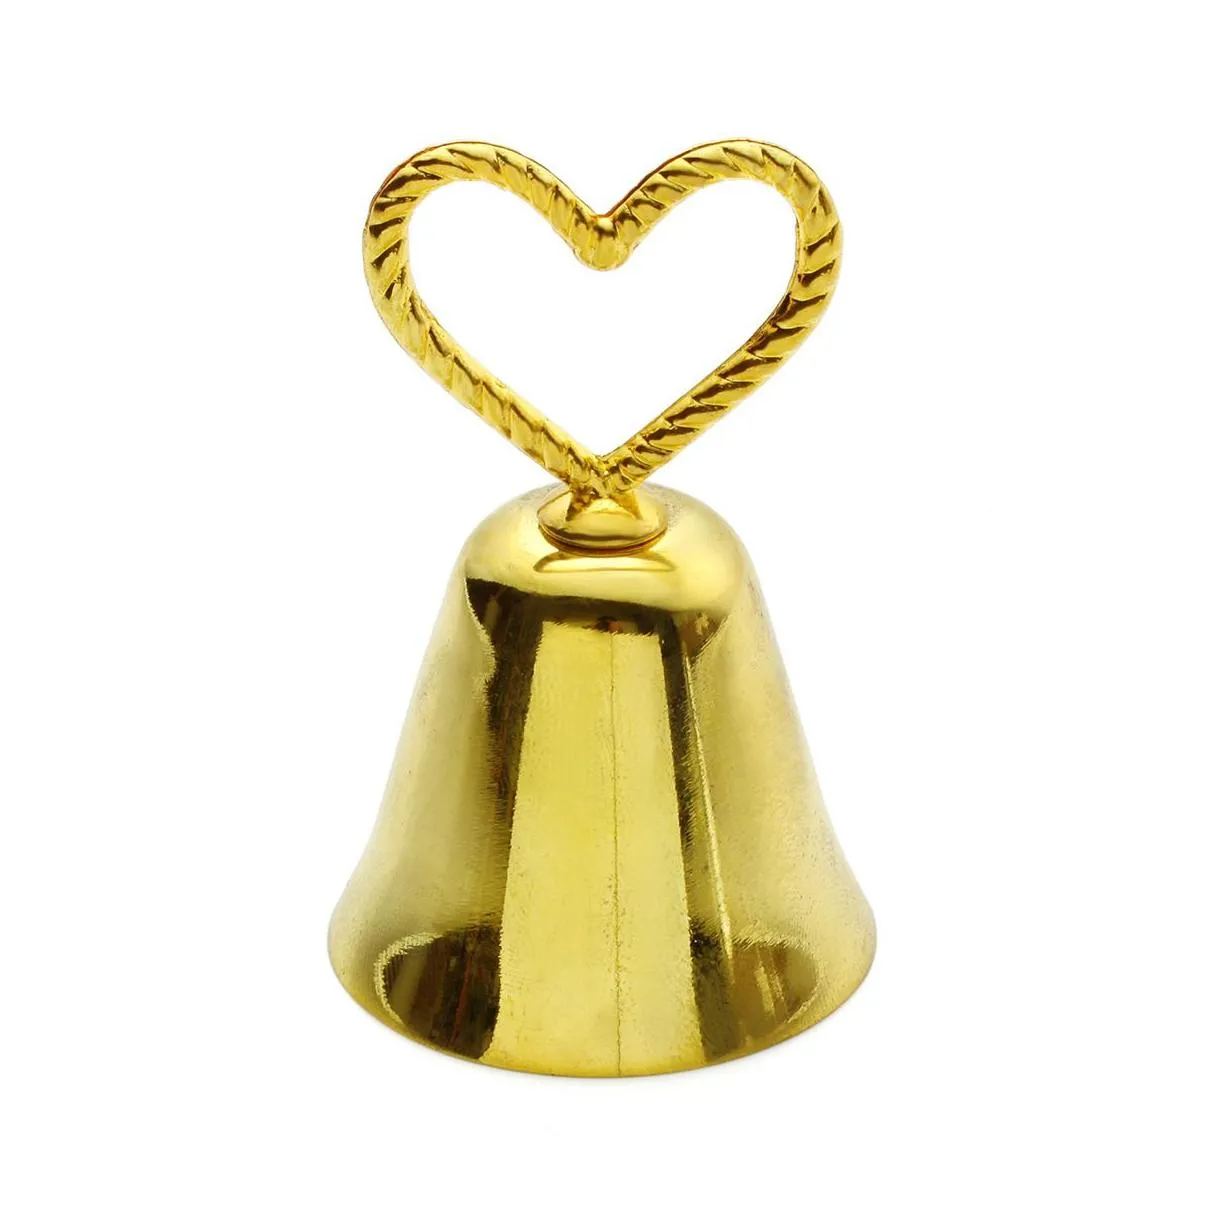 other wedding favors 100 pcs size 6x34cm beautiful gold silver kissing bell place card holder photo holder table decoration party